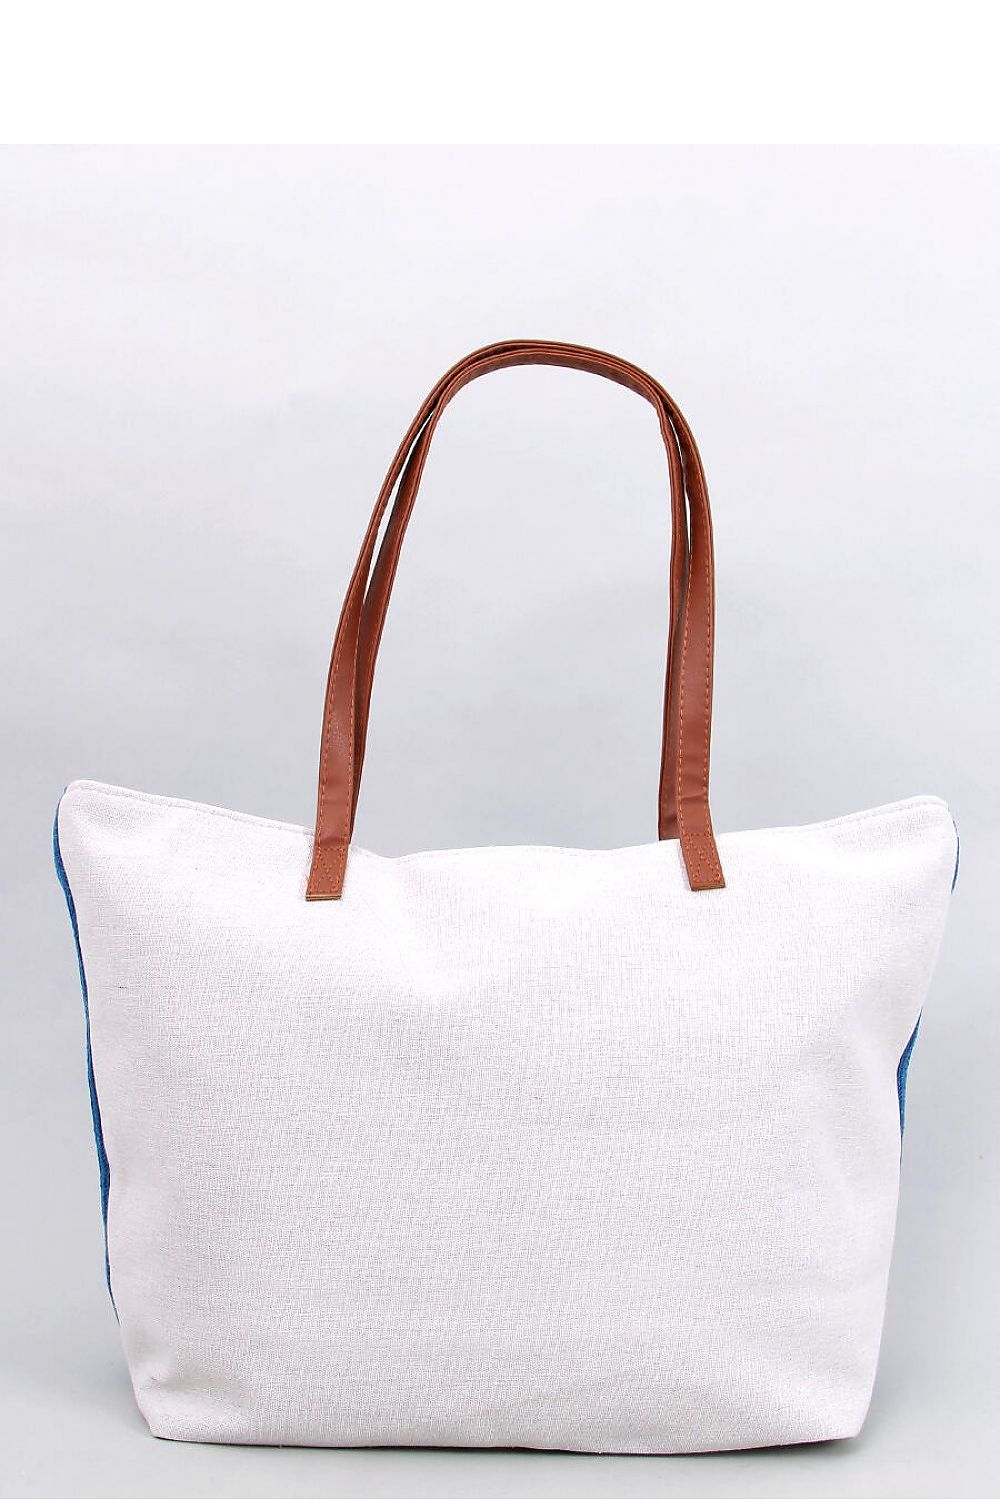 Blue and White Beach Bag by Inello